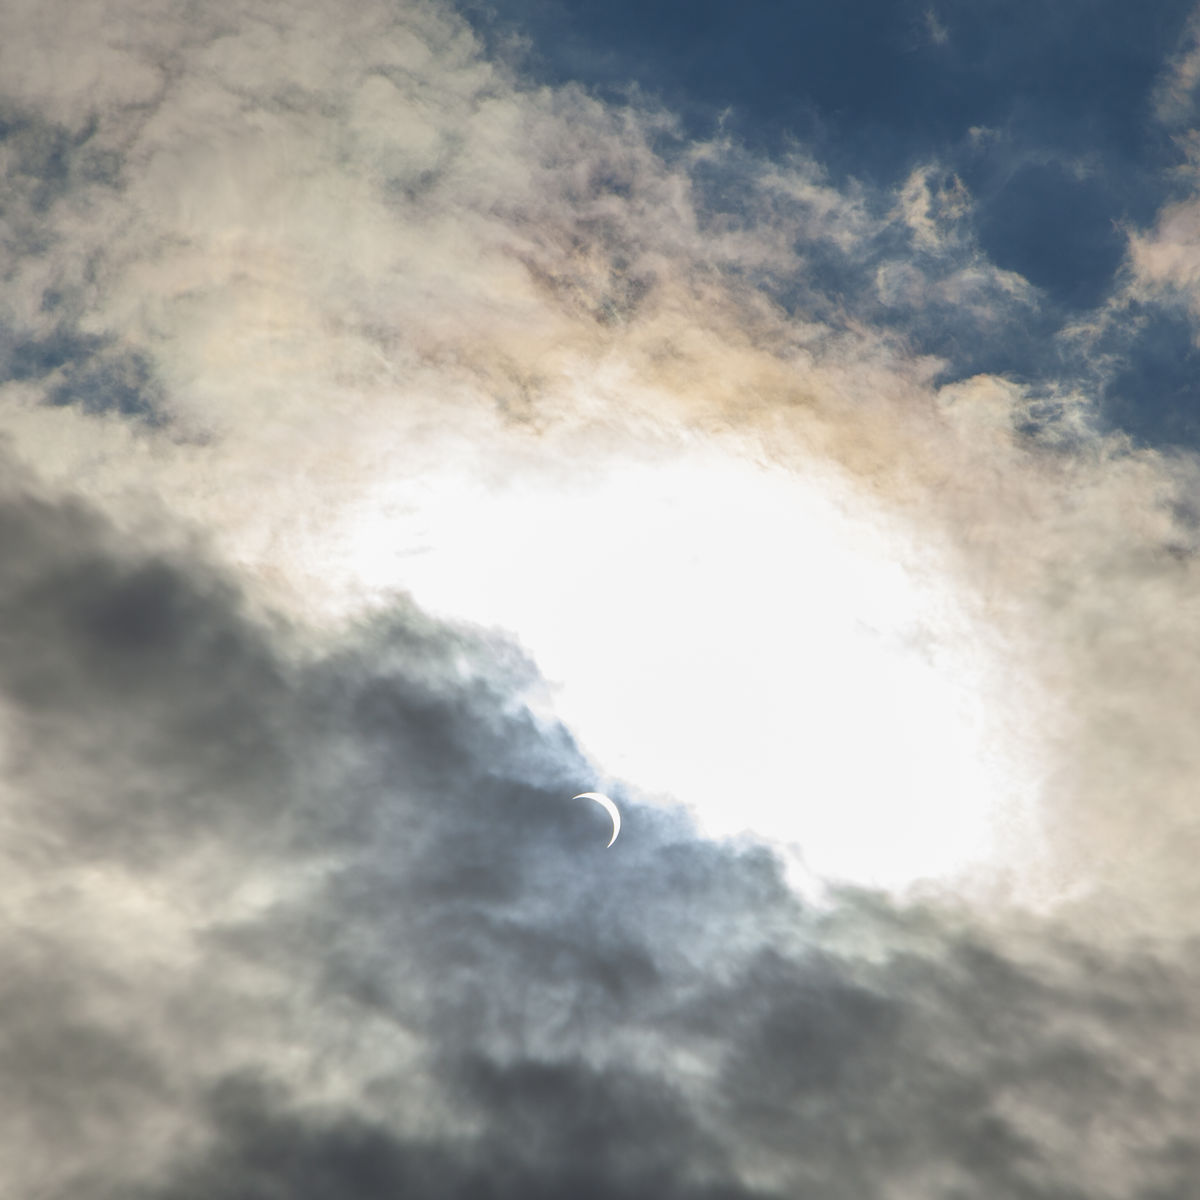 Eclipse 2017 Clouds Solar Eclipse 2017 Photo Gallery Cloudy Nights